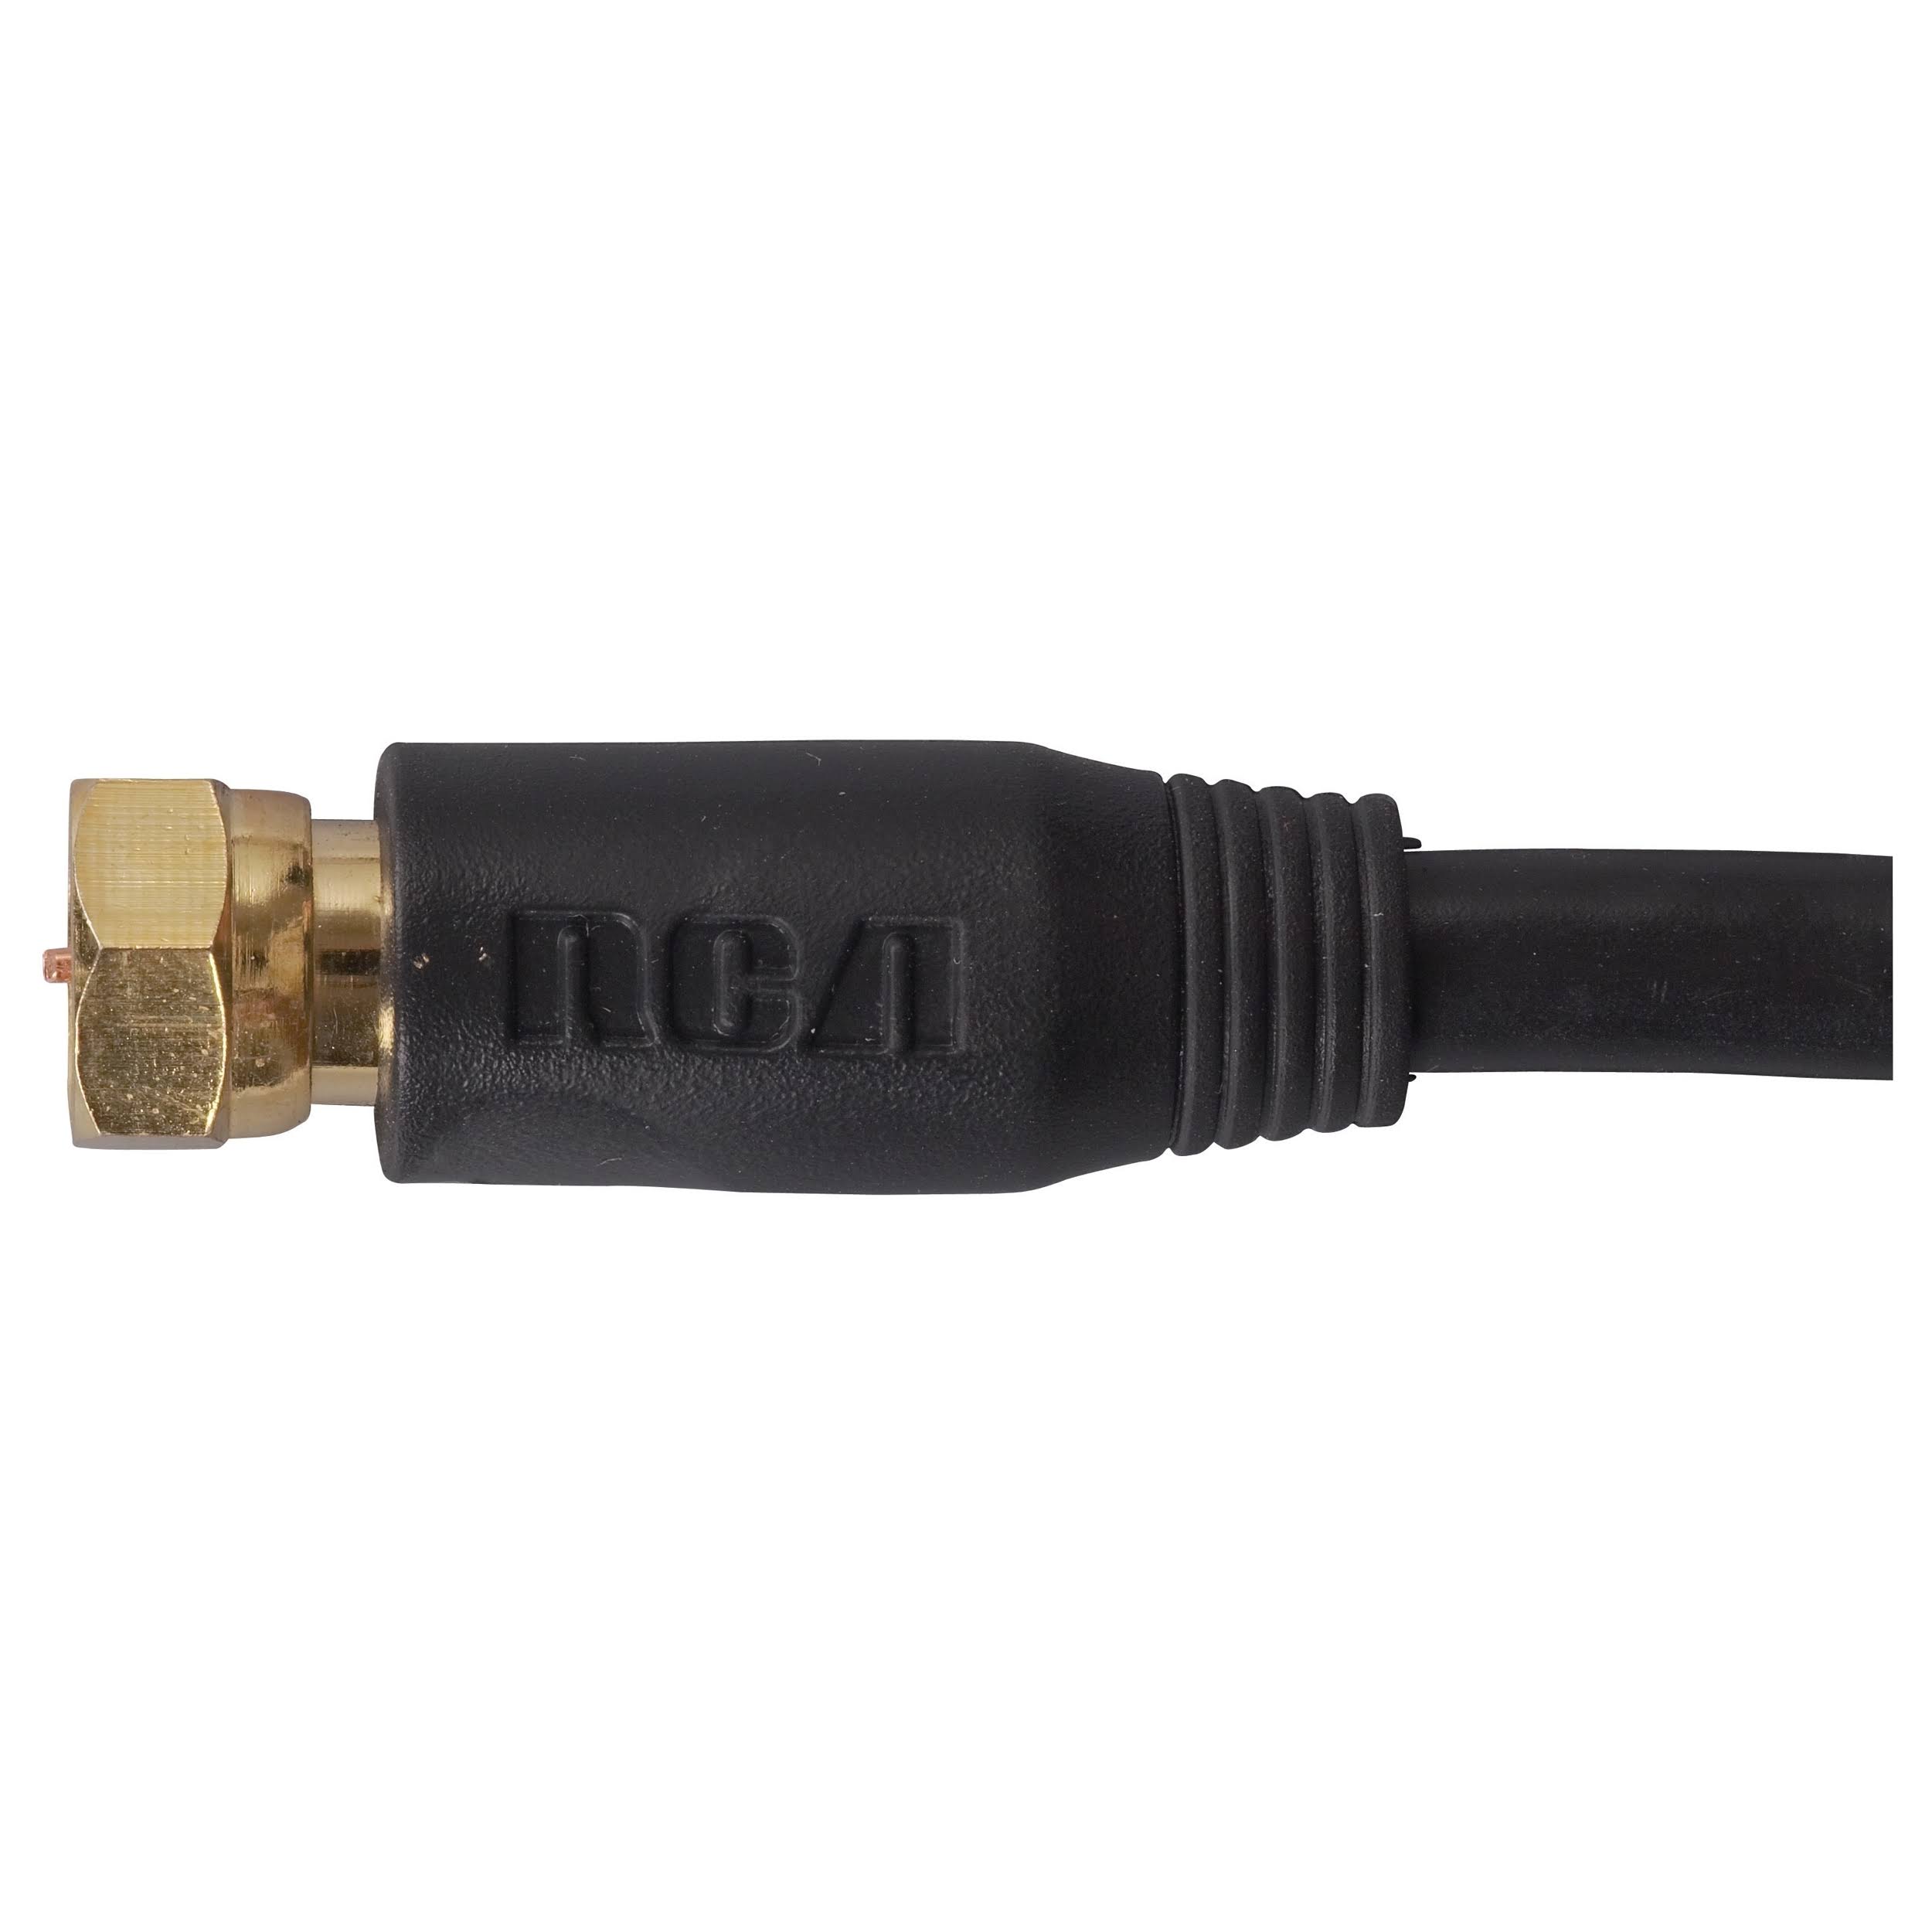 Rca Rg-6 Coax Cable - Black, 18AWG, 30m